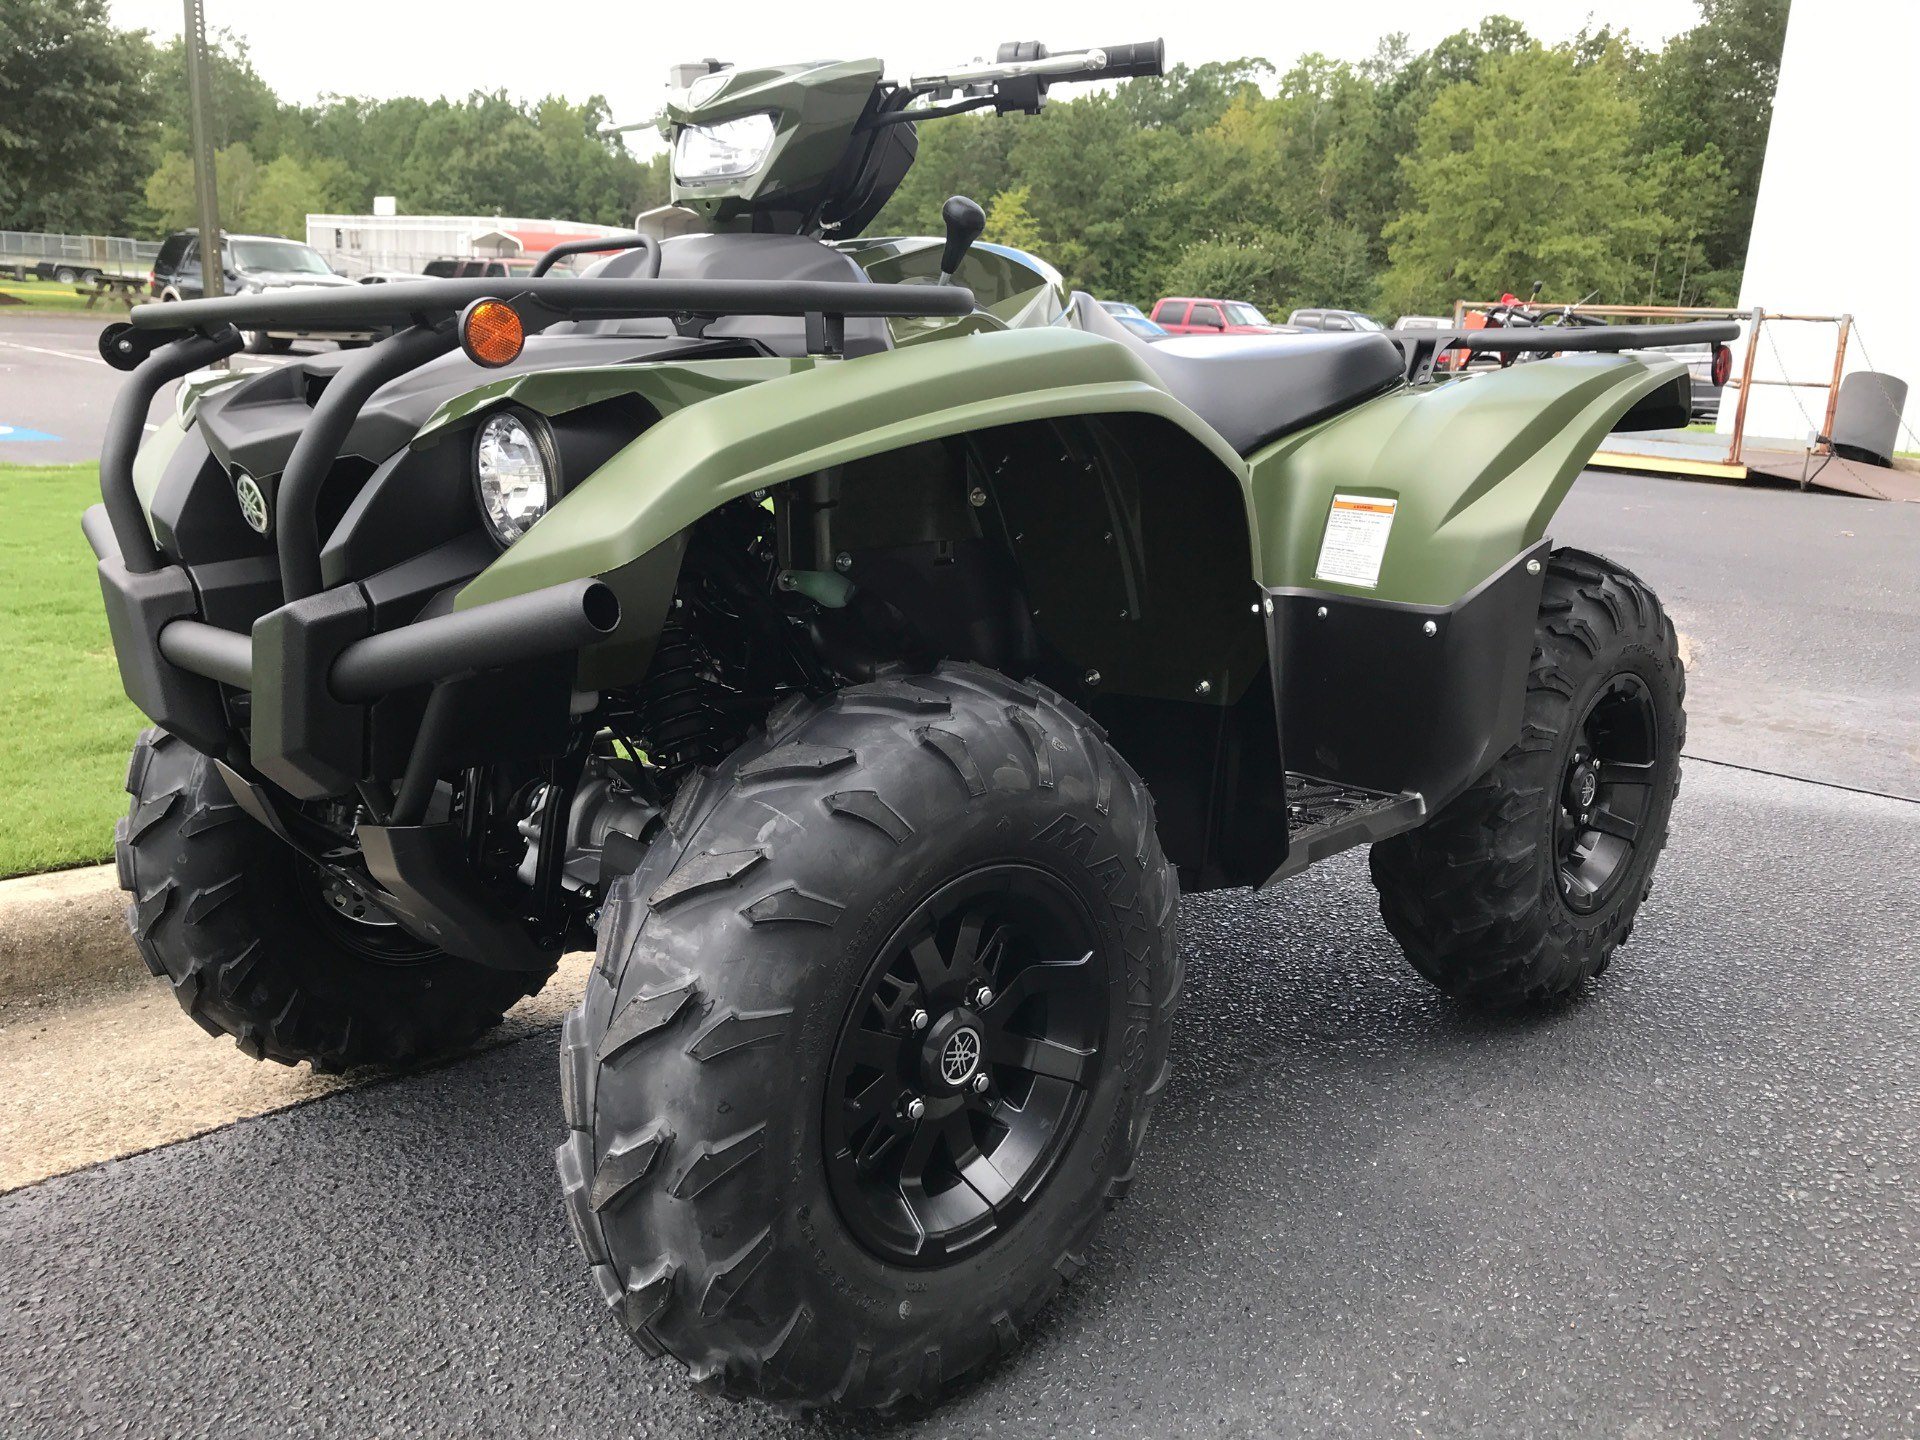 New 2020 Yamaha Kodiak 700 EPS ATVs in Greenville, NC Stock Number N/A